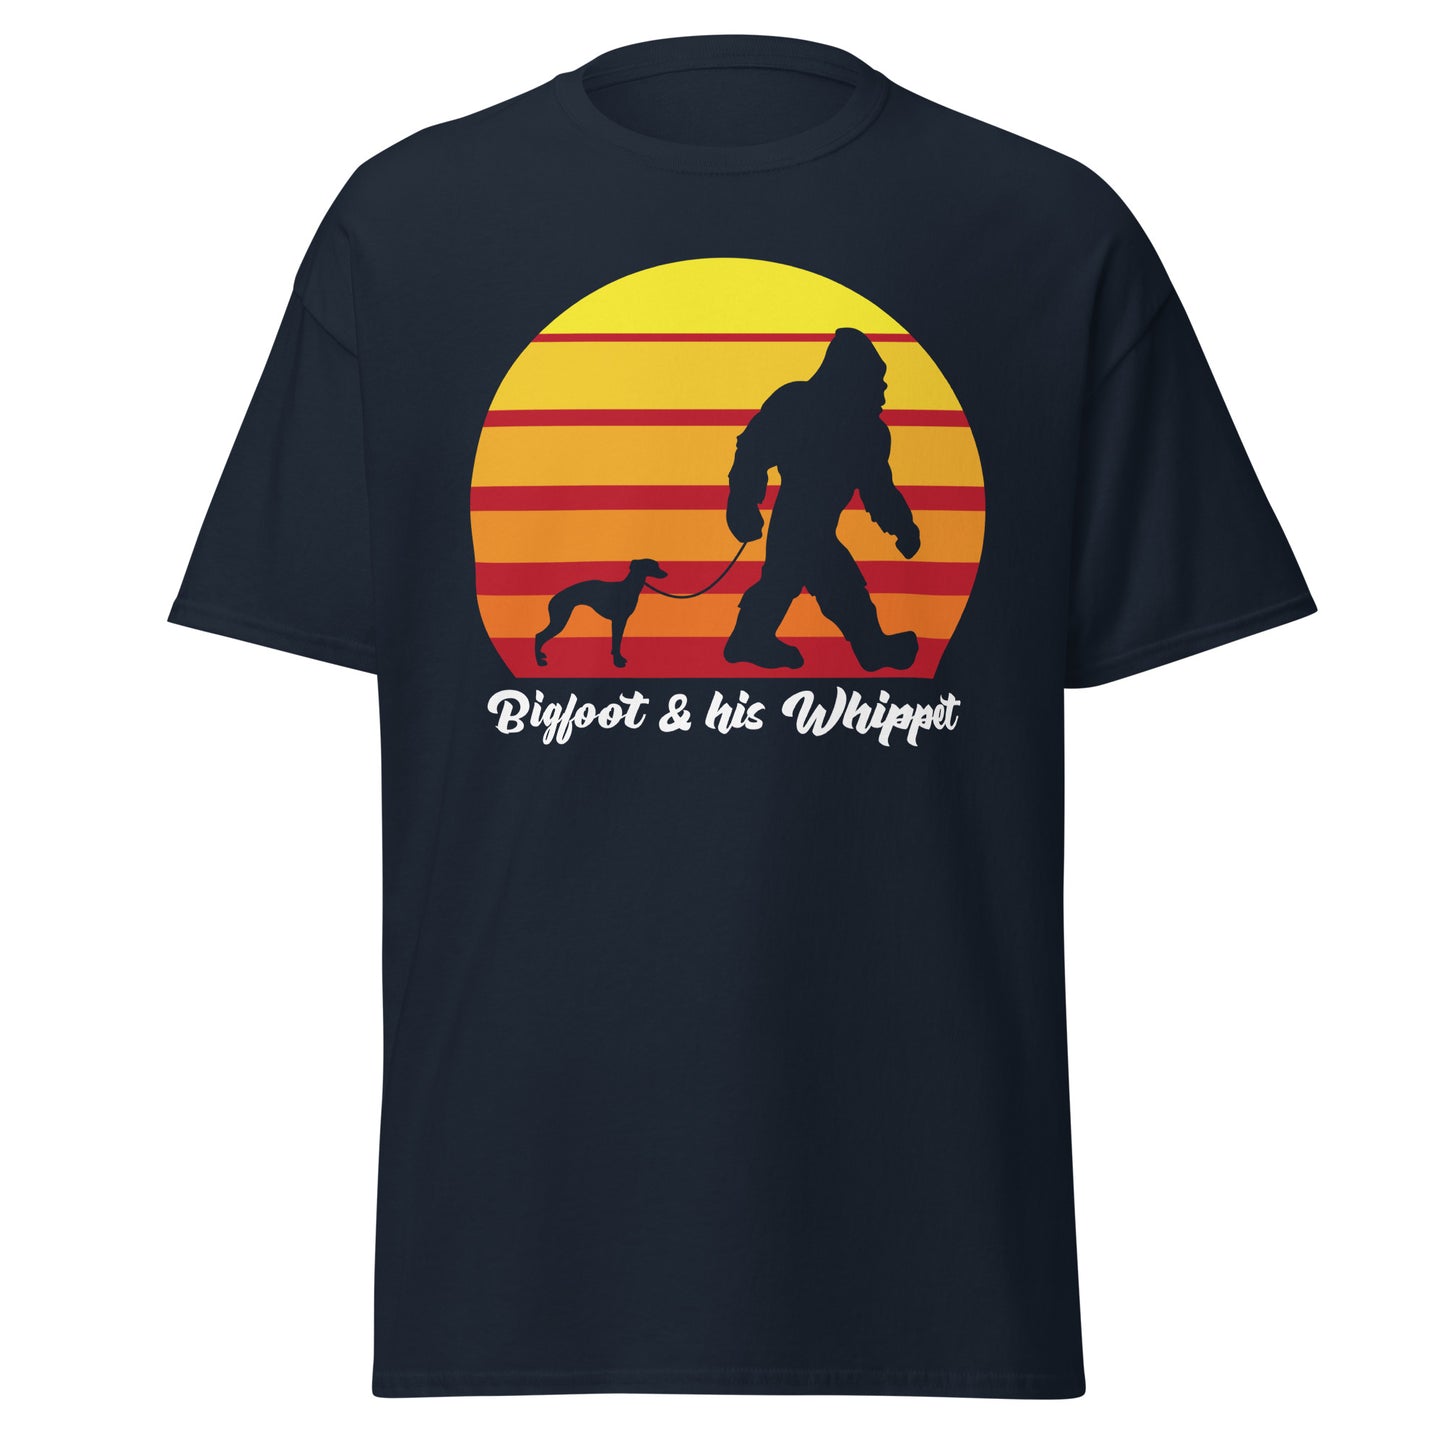 Bigfoot and his Staffordshire Whippet men’s navy t-shirt by Dog Artistry.